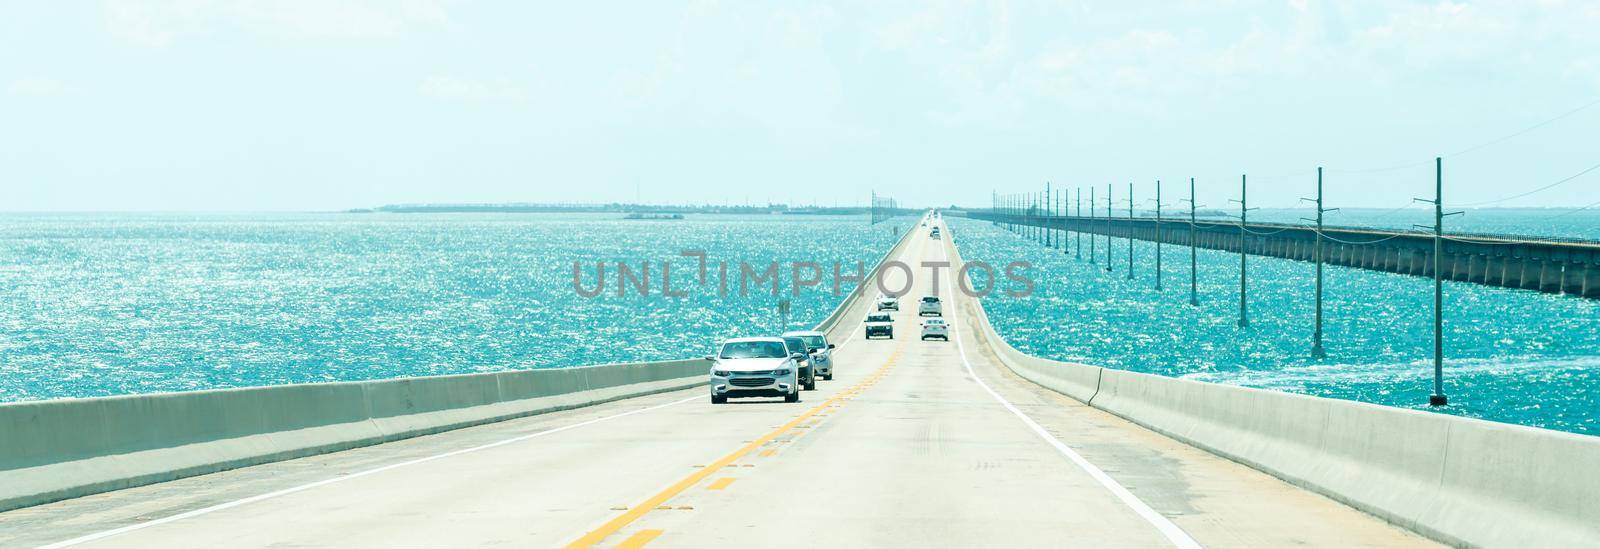 Panorama of Road US1 to Key West over Florida keys by Mariakray